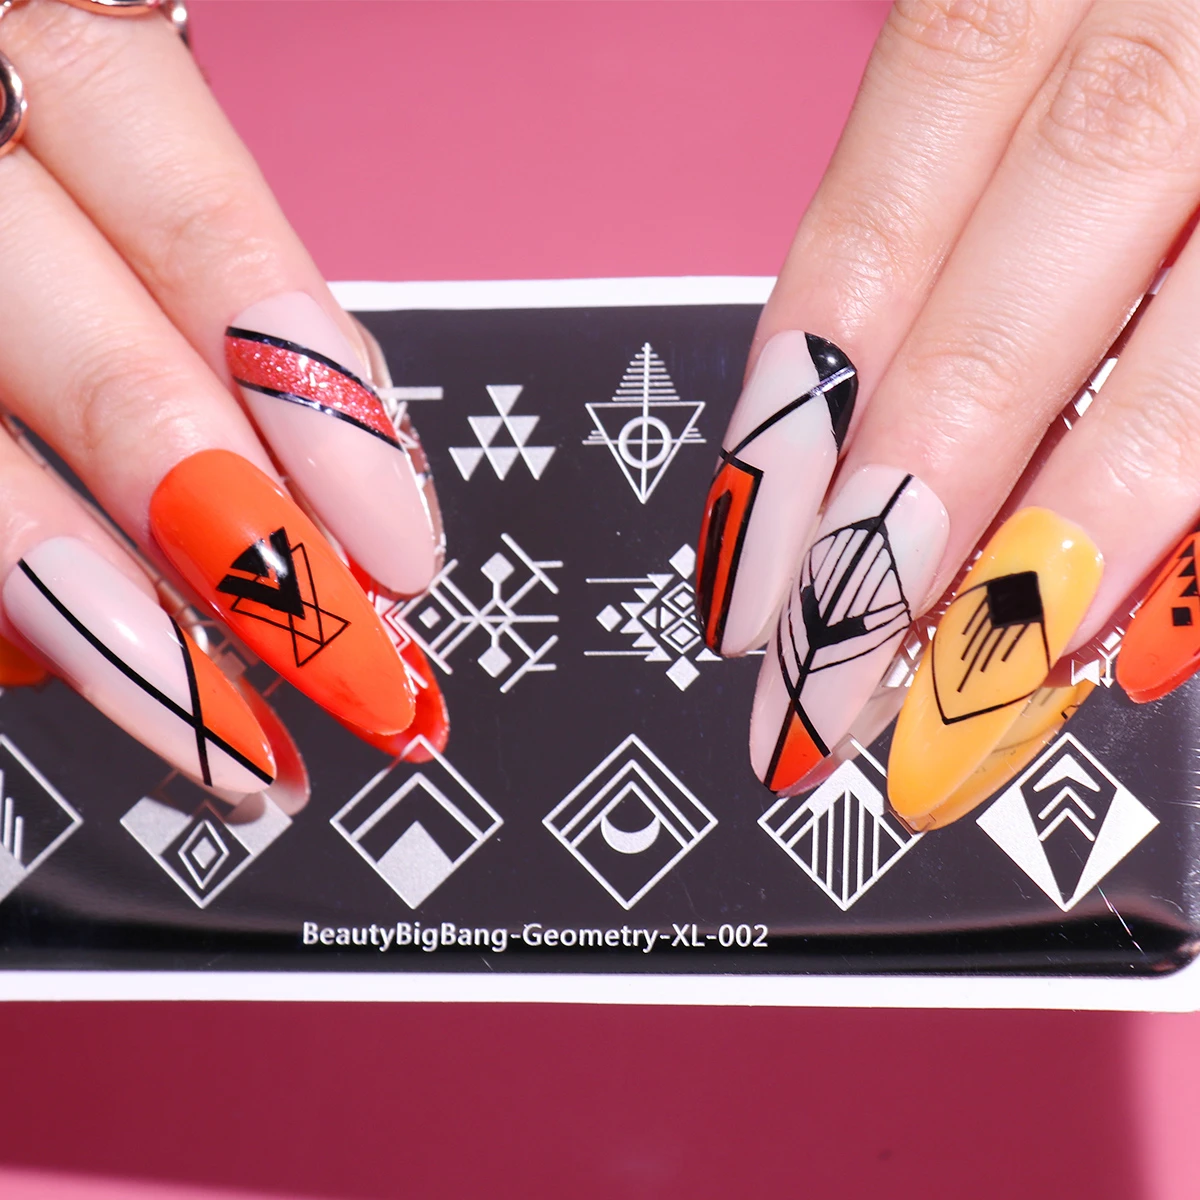 

Image BeautyBigBang Nail Art Moon Stamping Template Plates Triangle Geometry Stainless Steel 002 Nail Lines Stencil Square Star